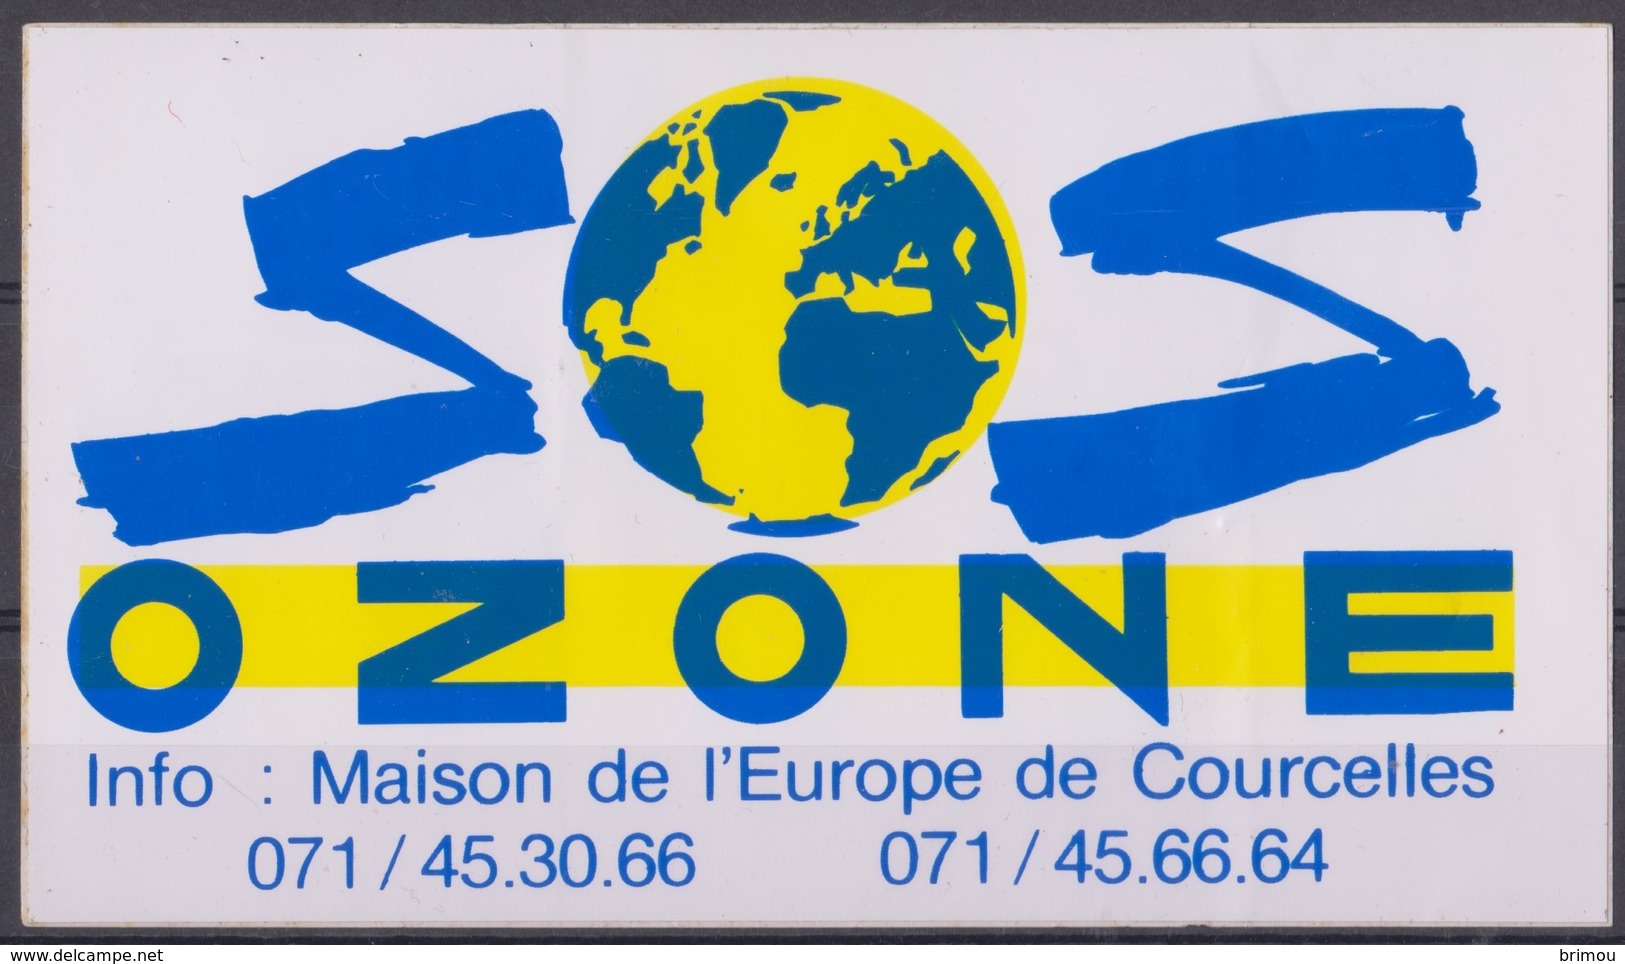 Autocollant, SOS Ozone, Courcelles. - Stickers